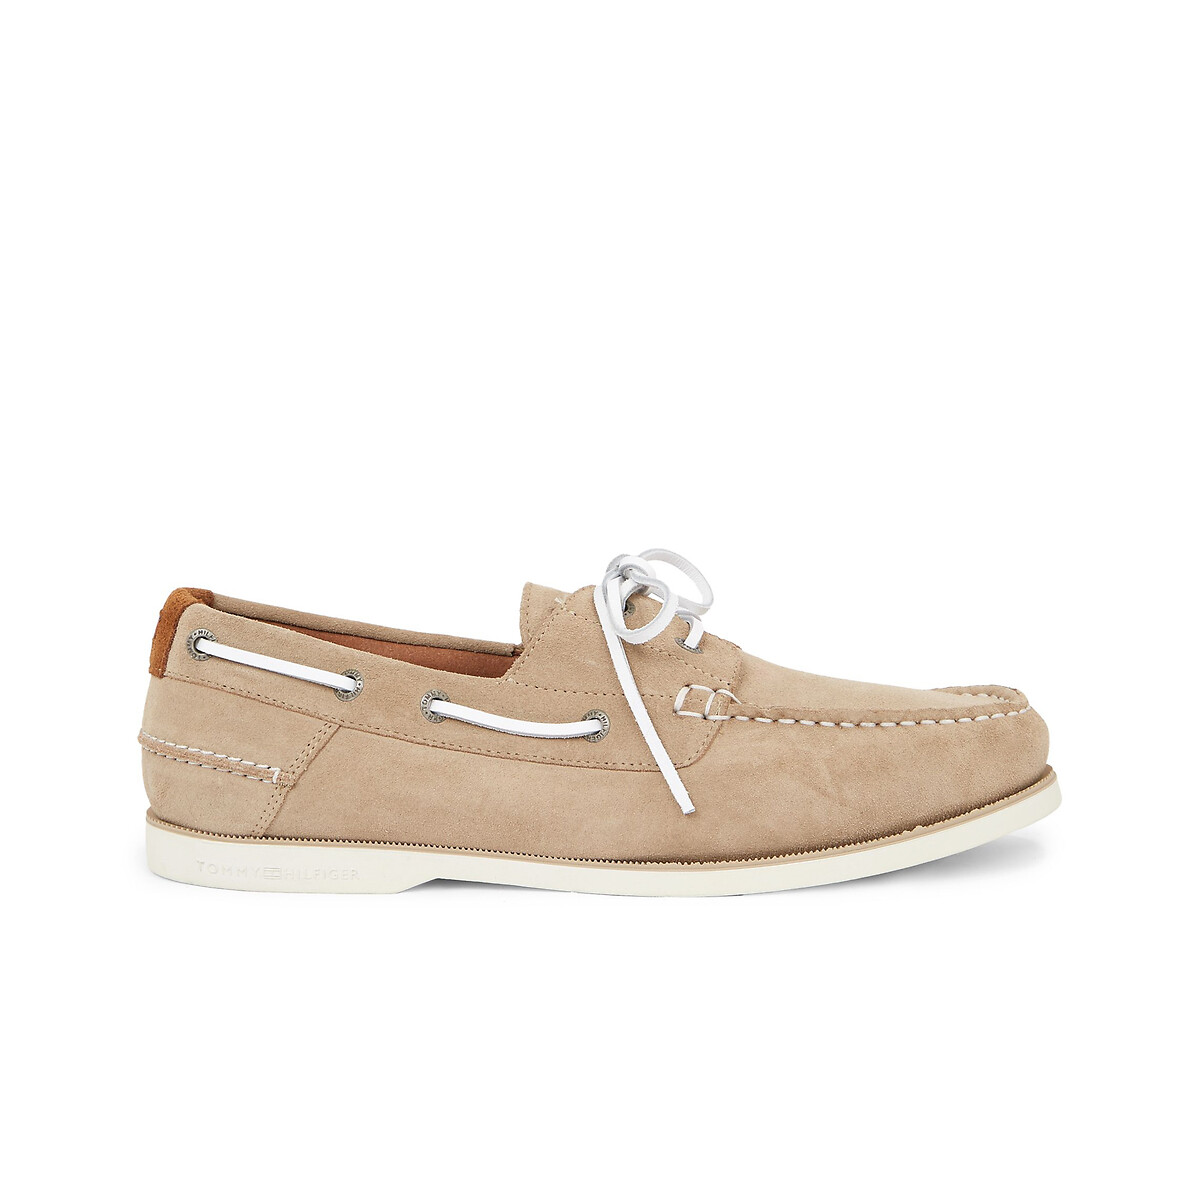 Image of Suede Boat Shoes